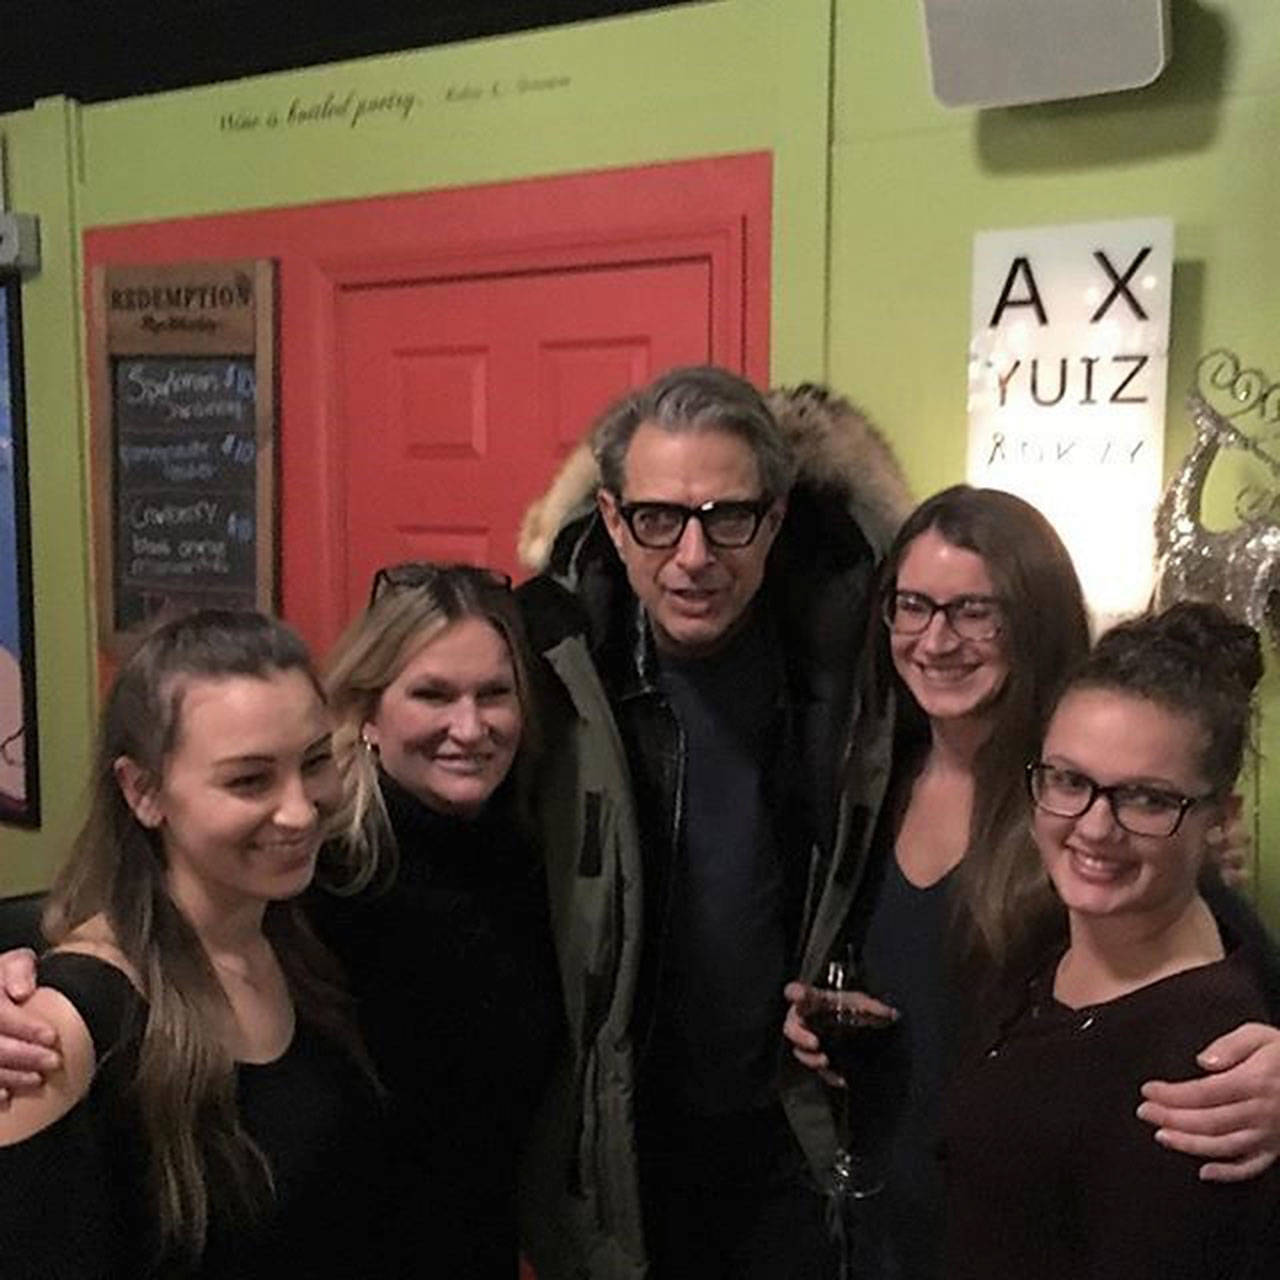 Amanda Florea, Kim McDougal, Carly Swingle and Devon Santiago pose for a photo with actor Jeff Goldblum on Dec. 5 in Blondie’s Plate. Goldblum was in the area filming scenes for the new movie “The Mountain.” (Darren Stephens)